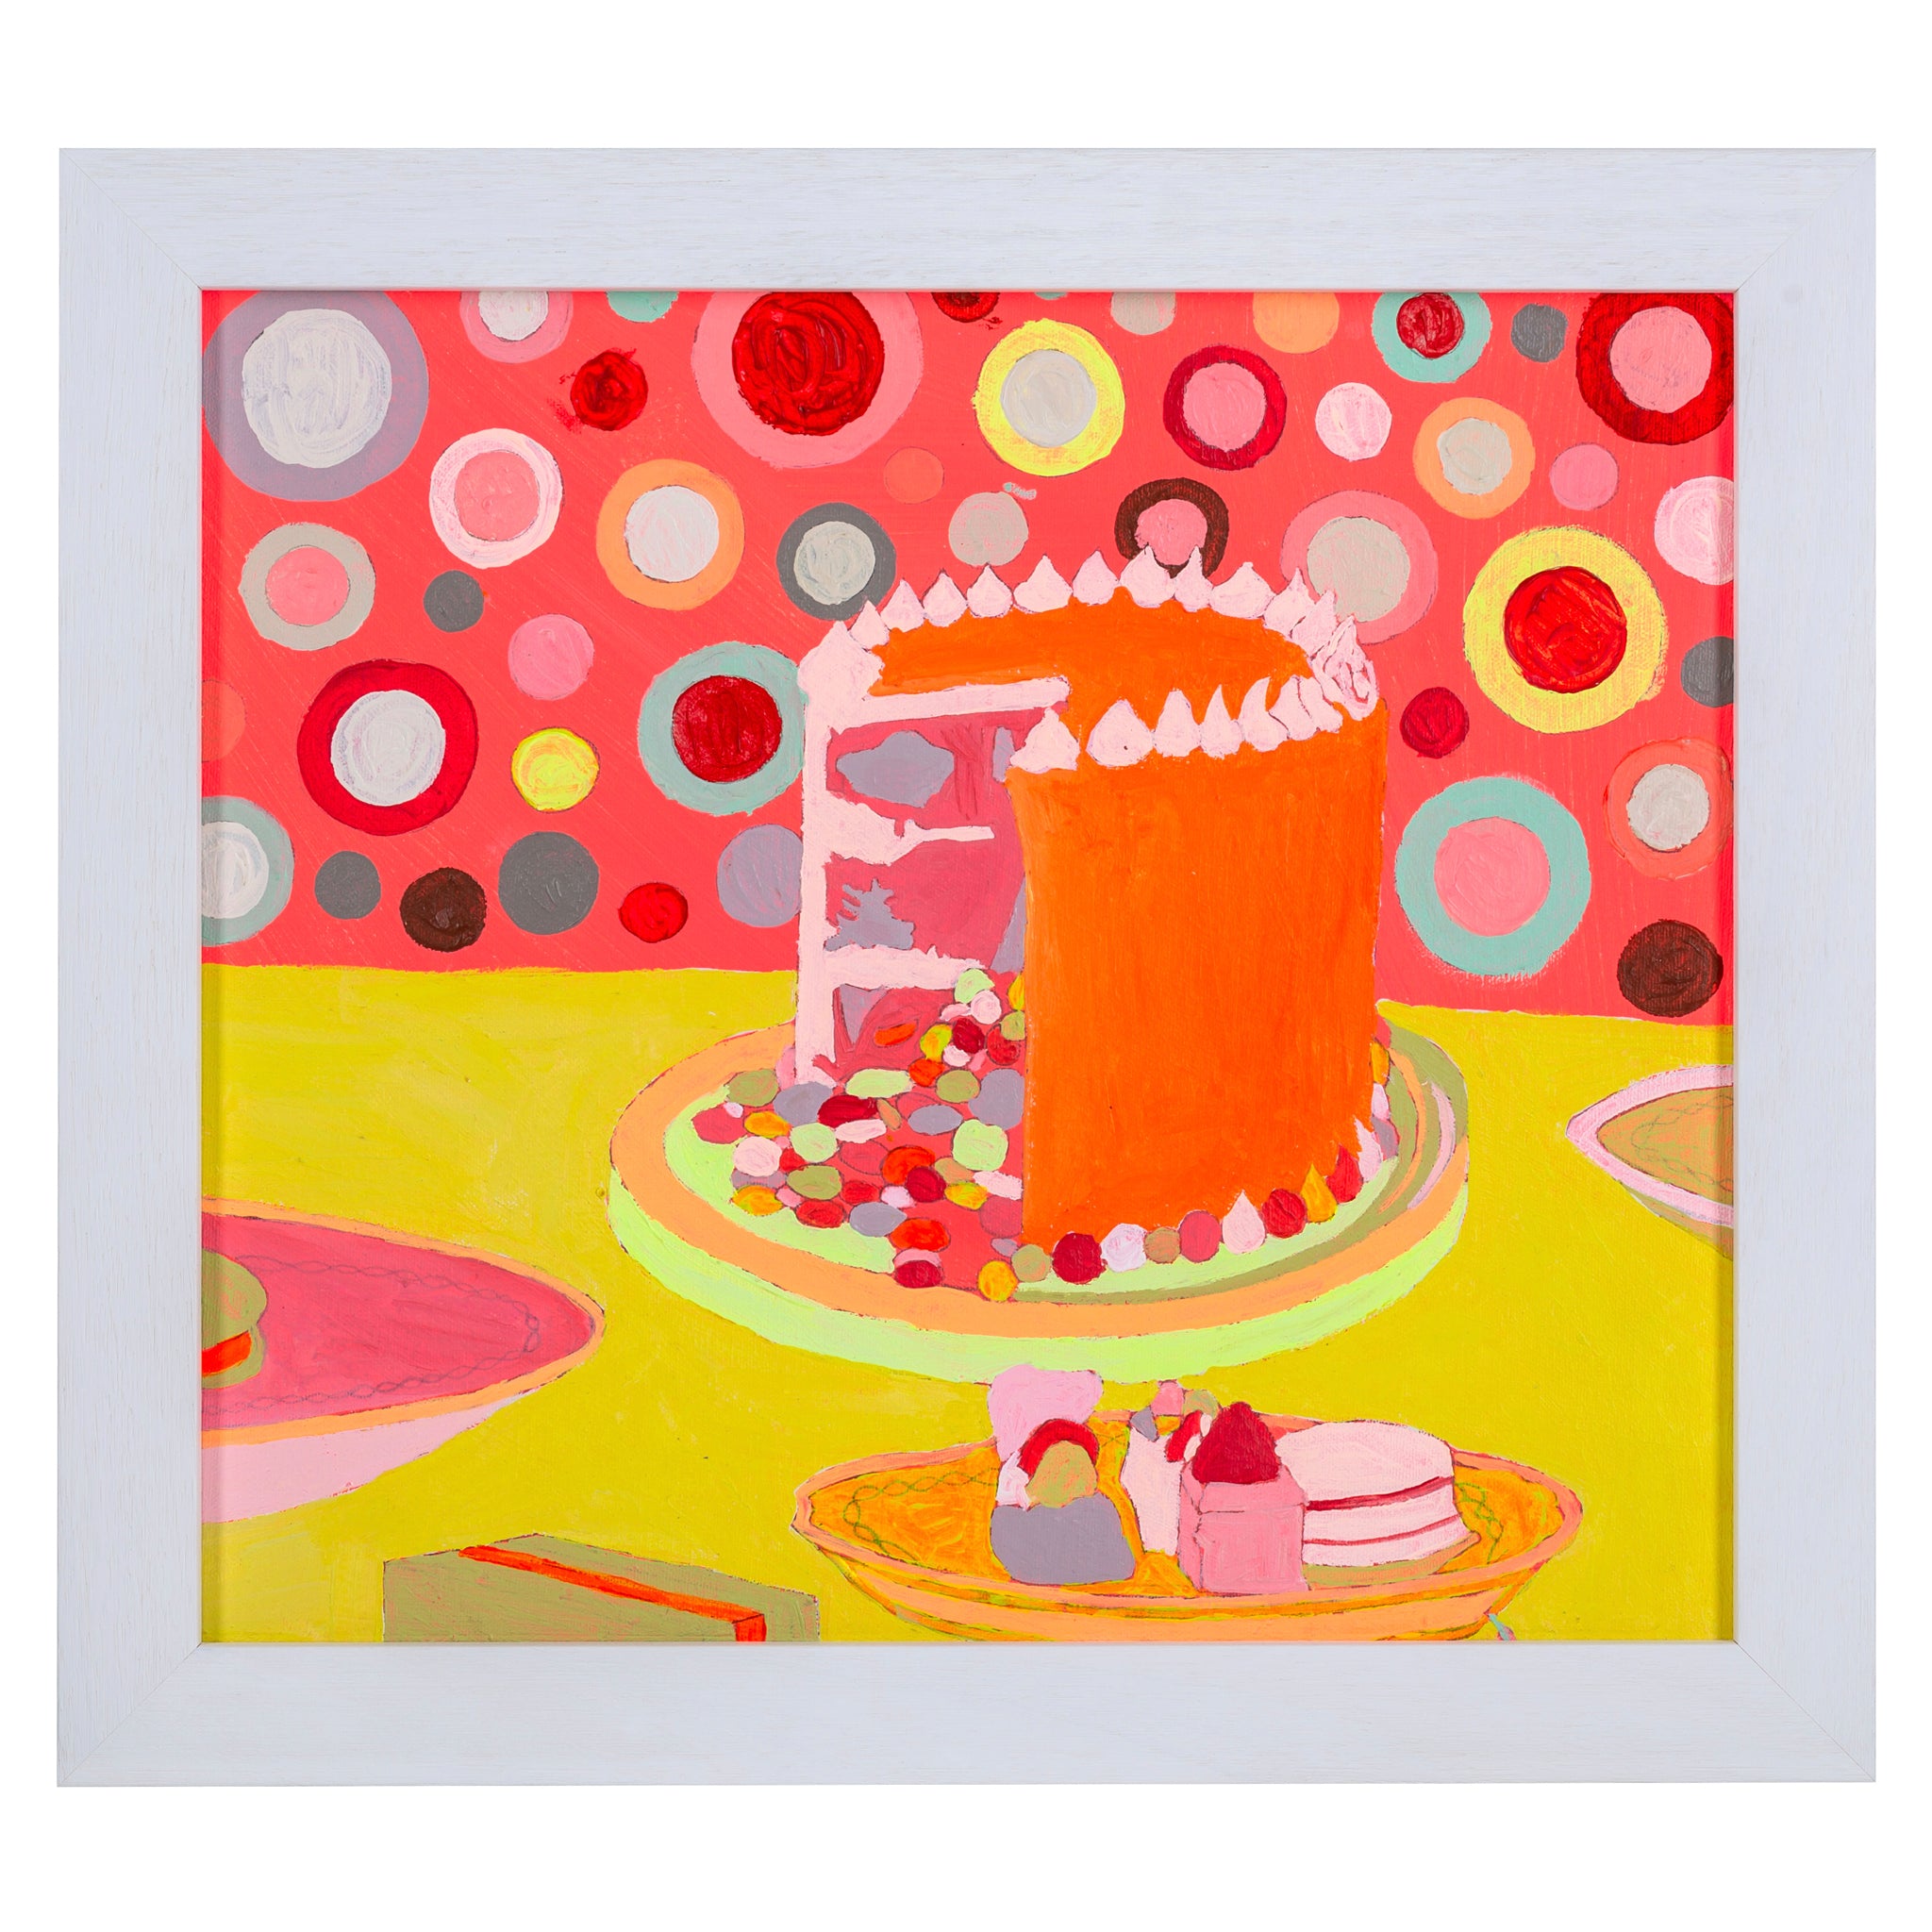 Framed hand painted celebration cake in pinks, oranges and yellow